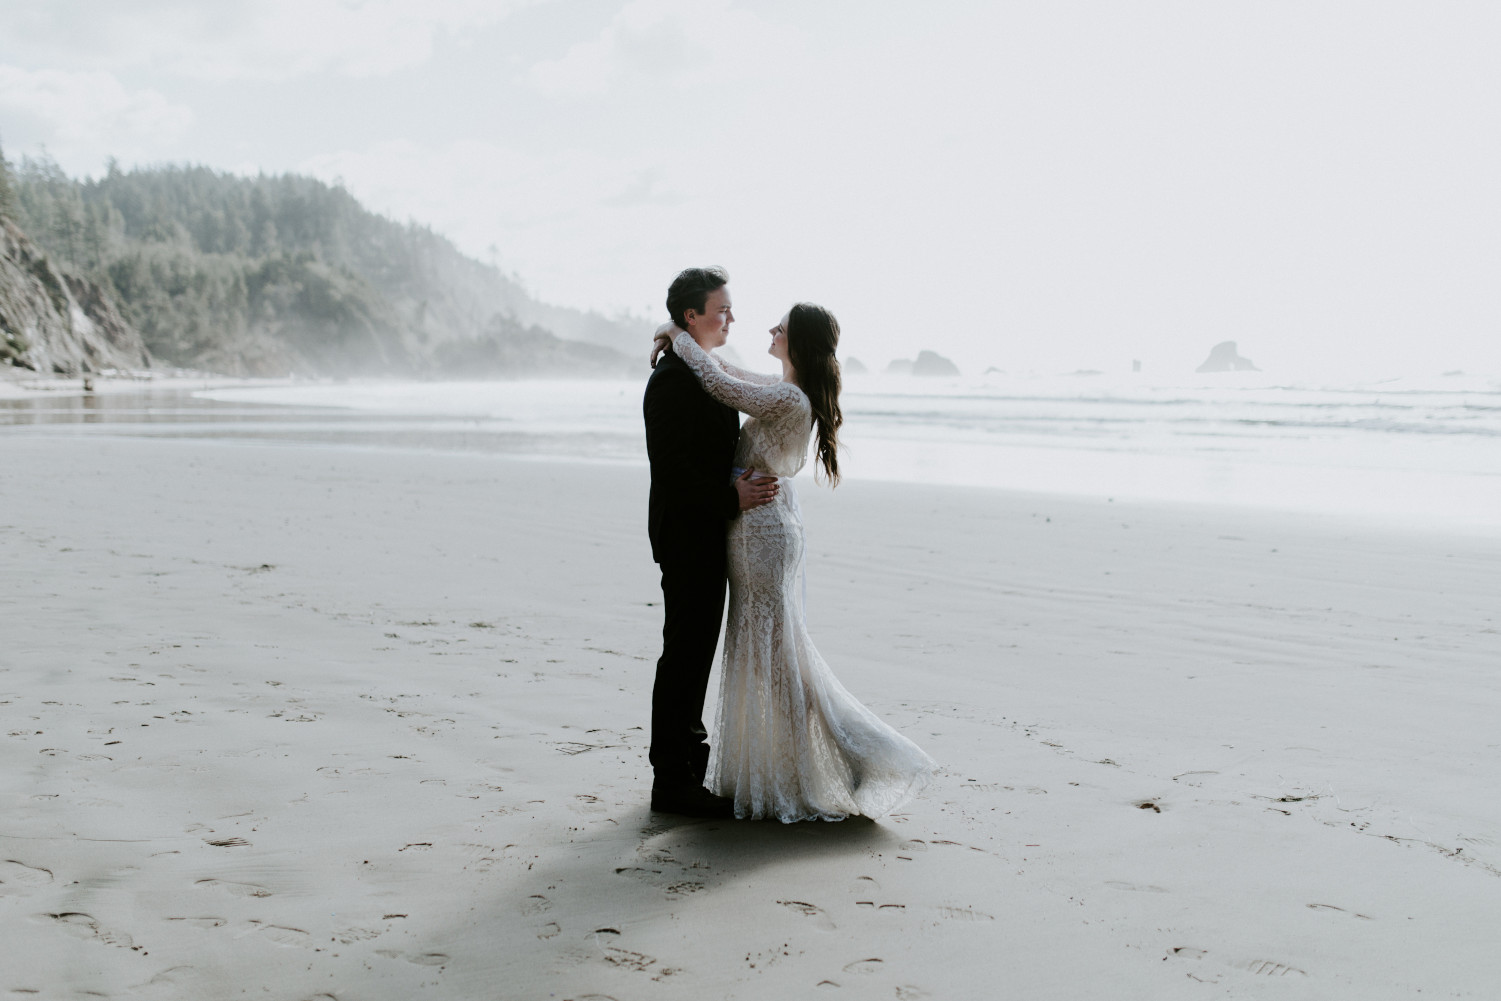 Nicole and Vlad hug on Indian Beach. Elopement wedding photography at Cannon Beach by Sienna Plus Josh.